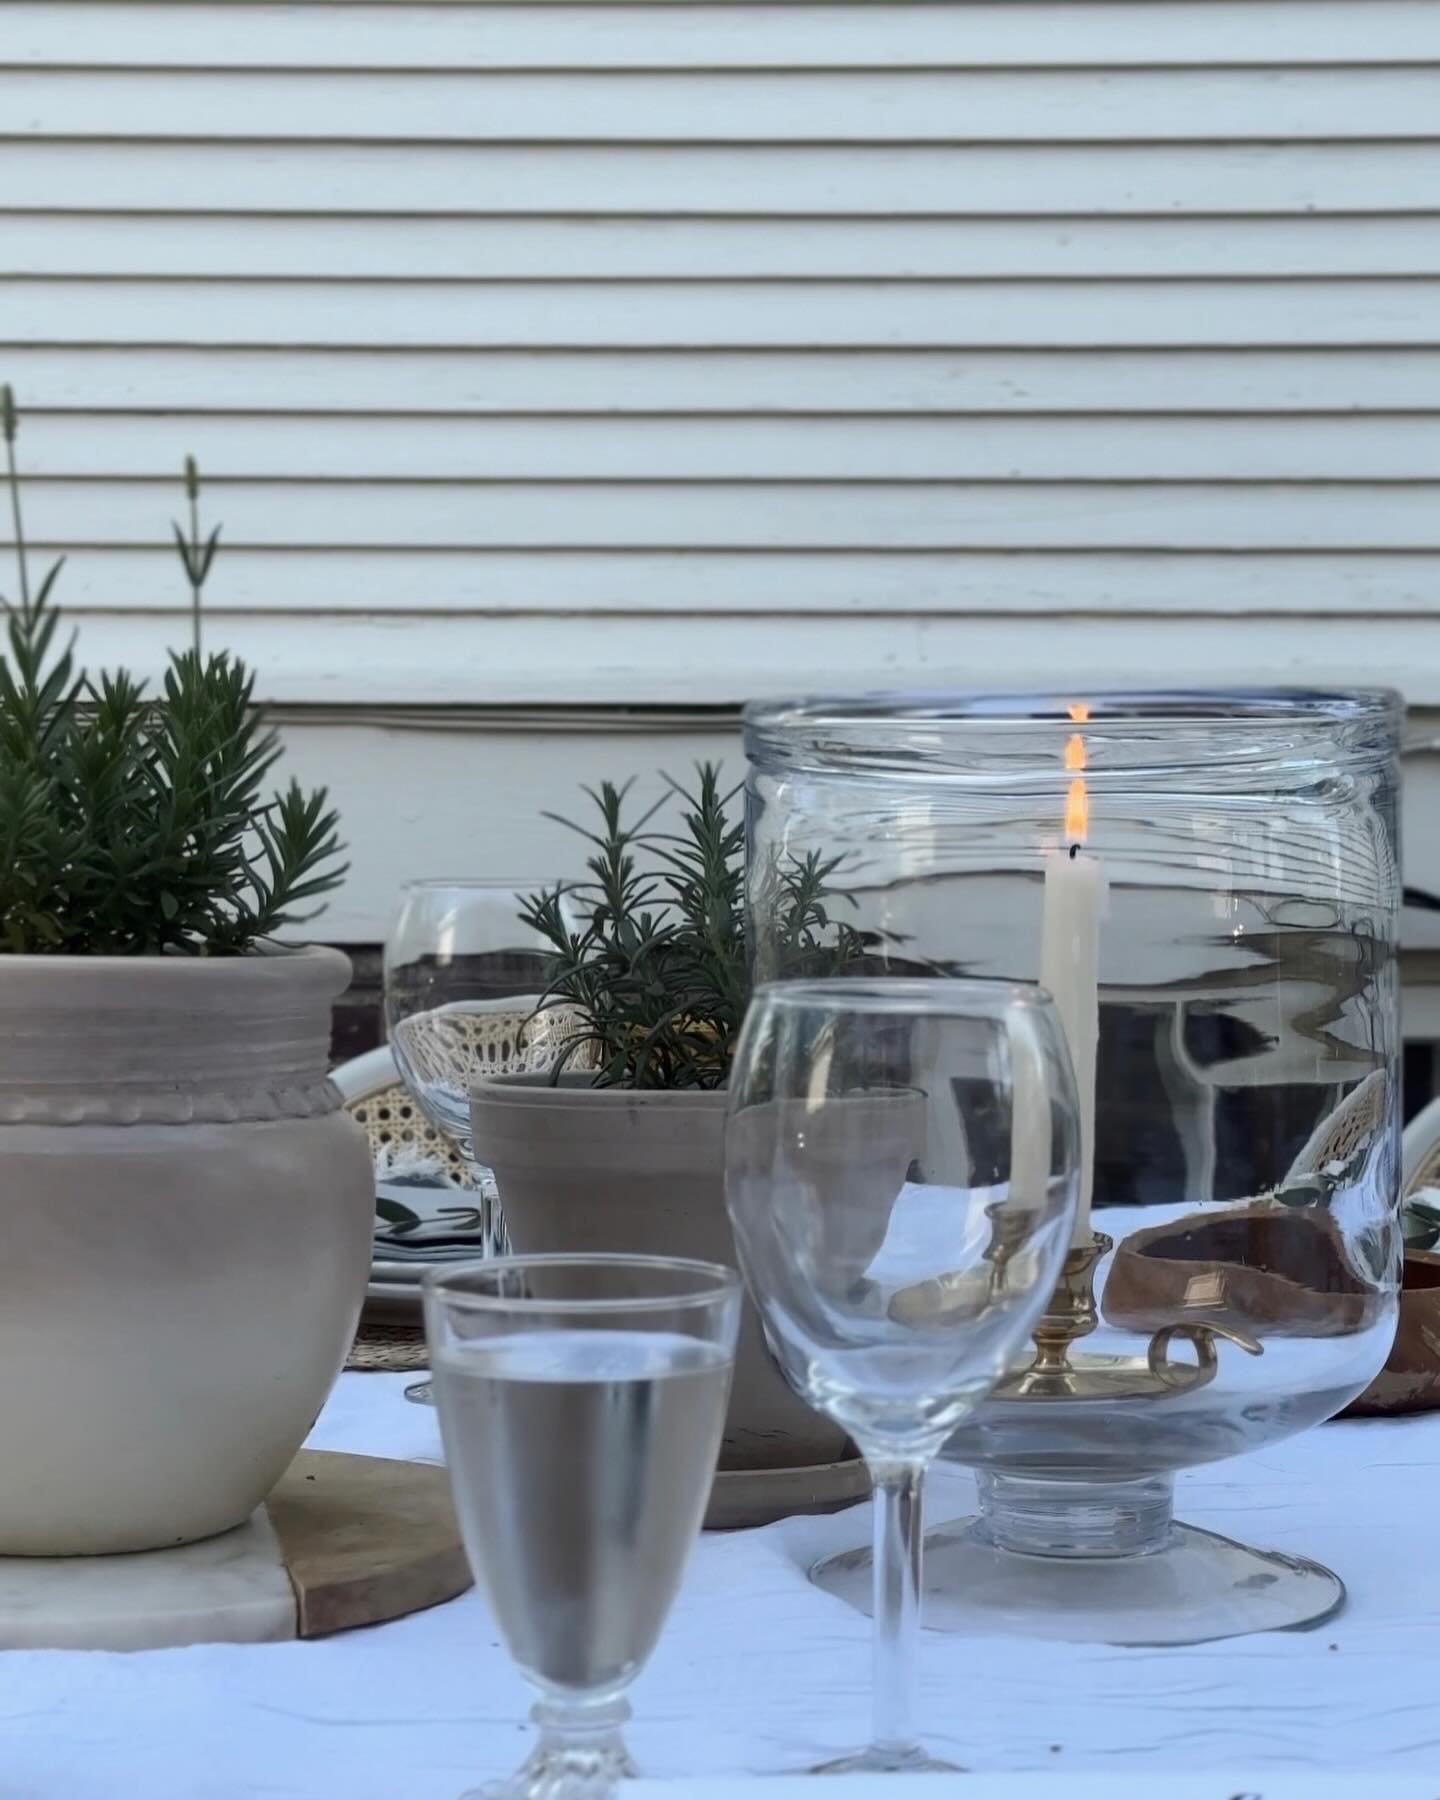 There is just something special about setting an outdoor table. 🌿 The ambiance, the evening breeze, and the comfort &amp; calm that the outside brings. 

Being able to gather around a table with those who matter to you is such a gift. And doing so o